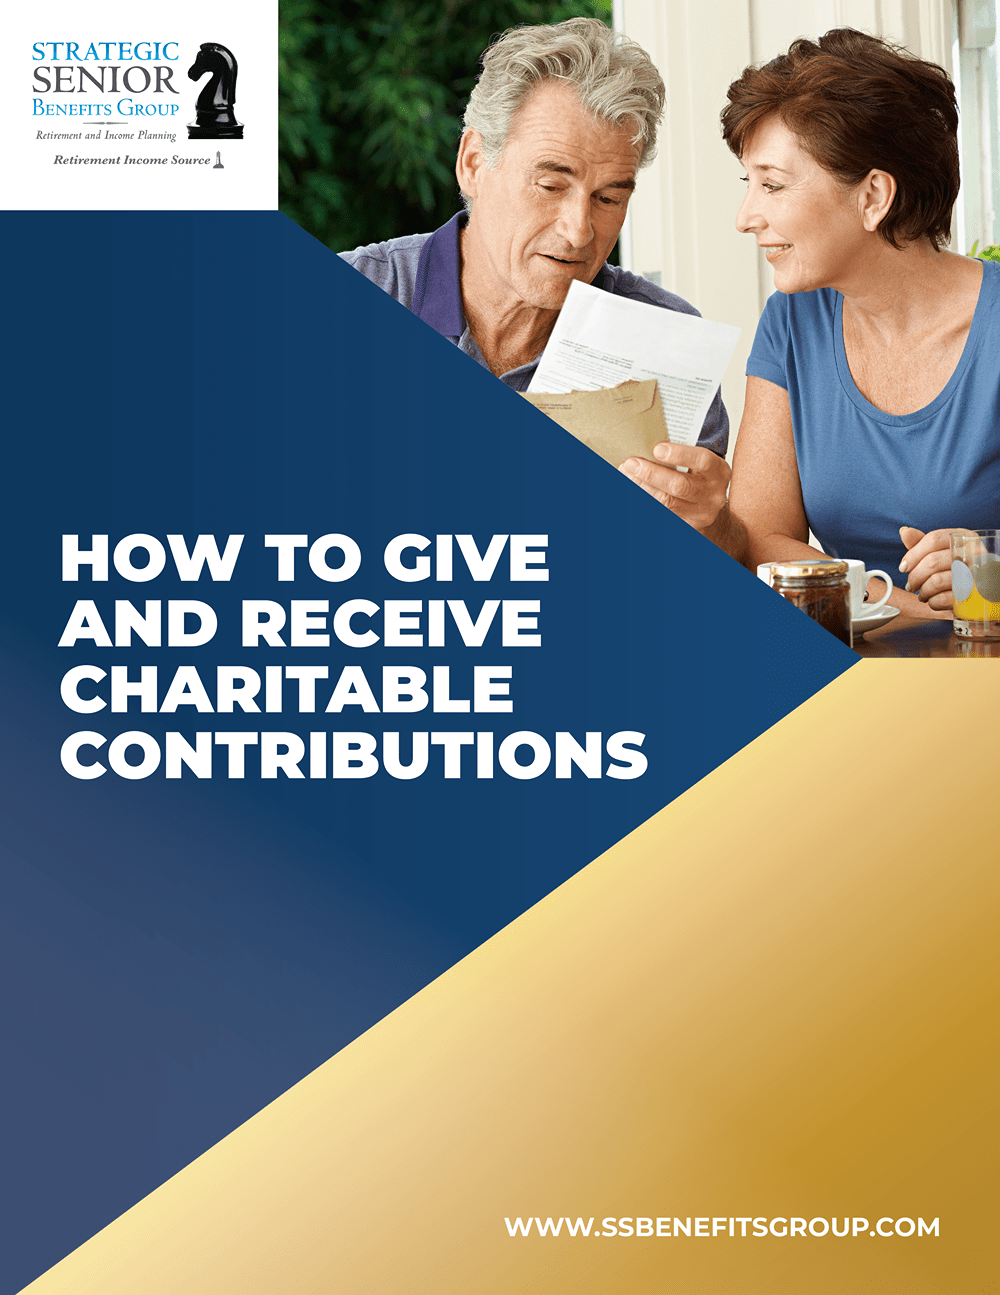 Strategic Senior Benefits Group - How to Give and Receive Charitable Contributions-1